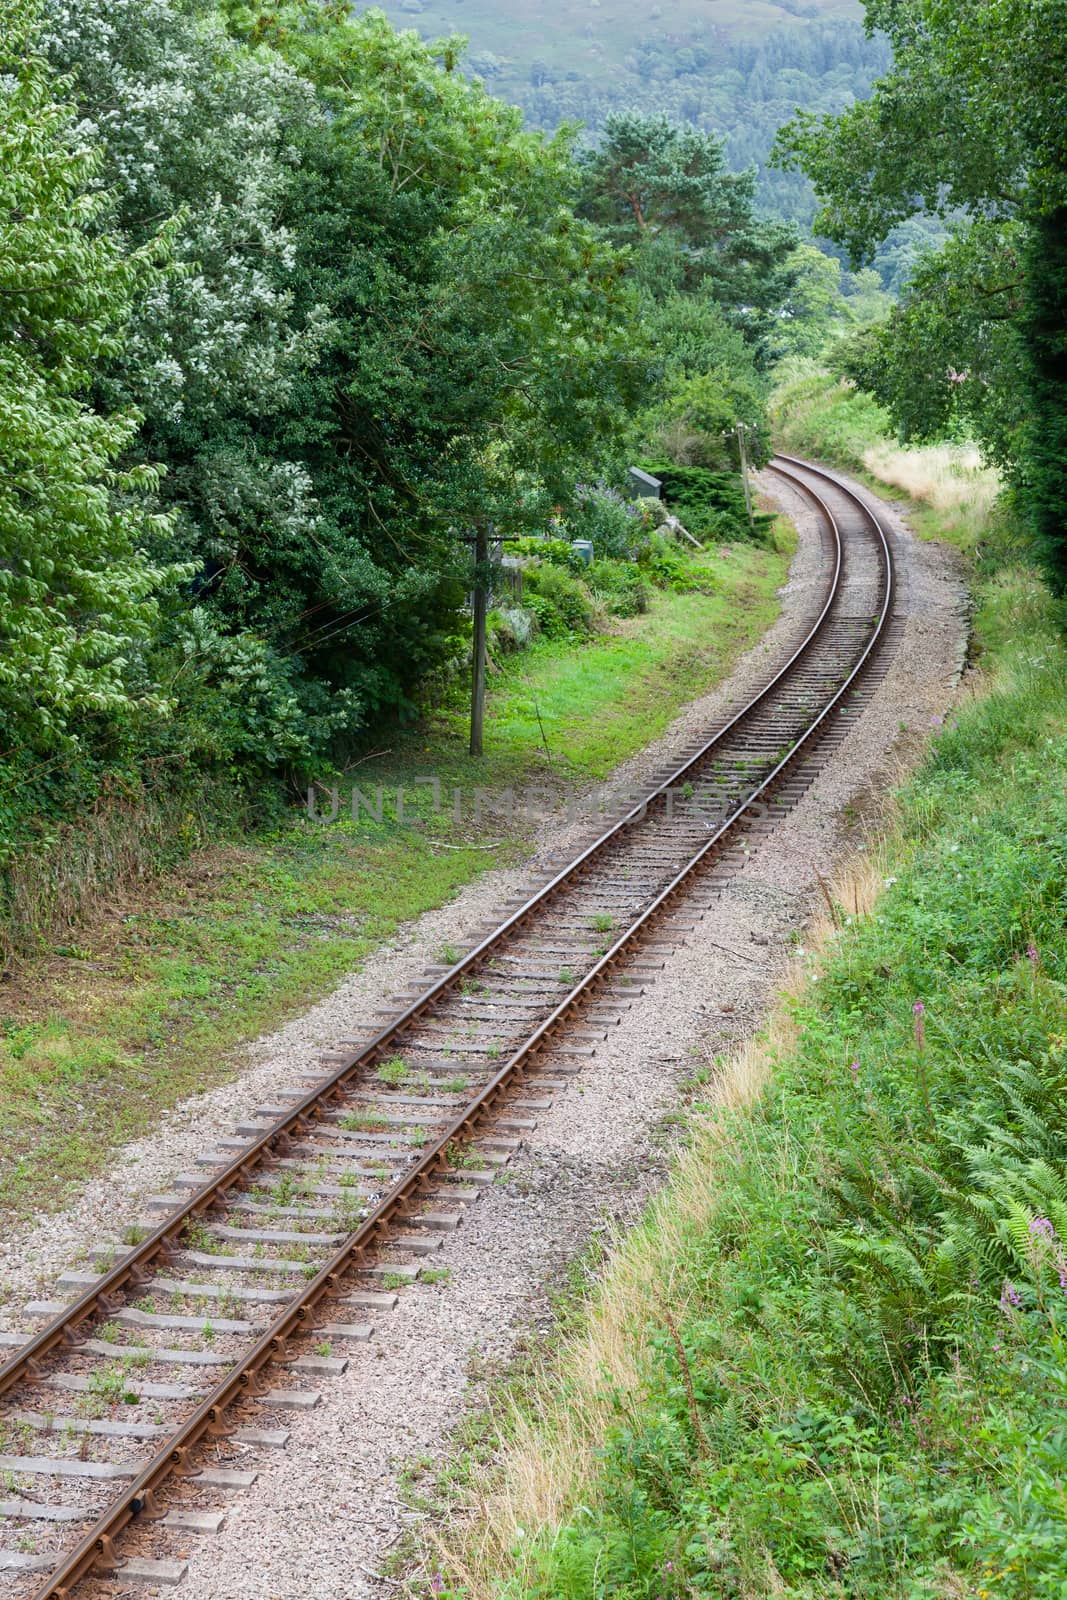 A stretch of railway track on the preserved Lakeside and Haverthwaite railway in Cumbria, northern England.